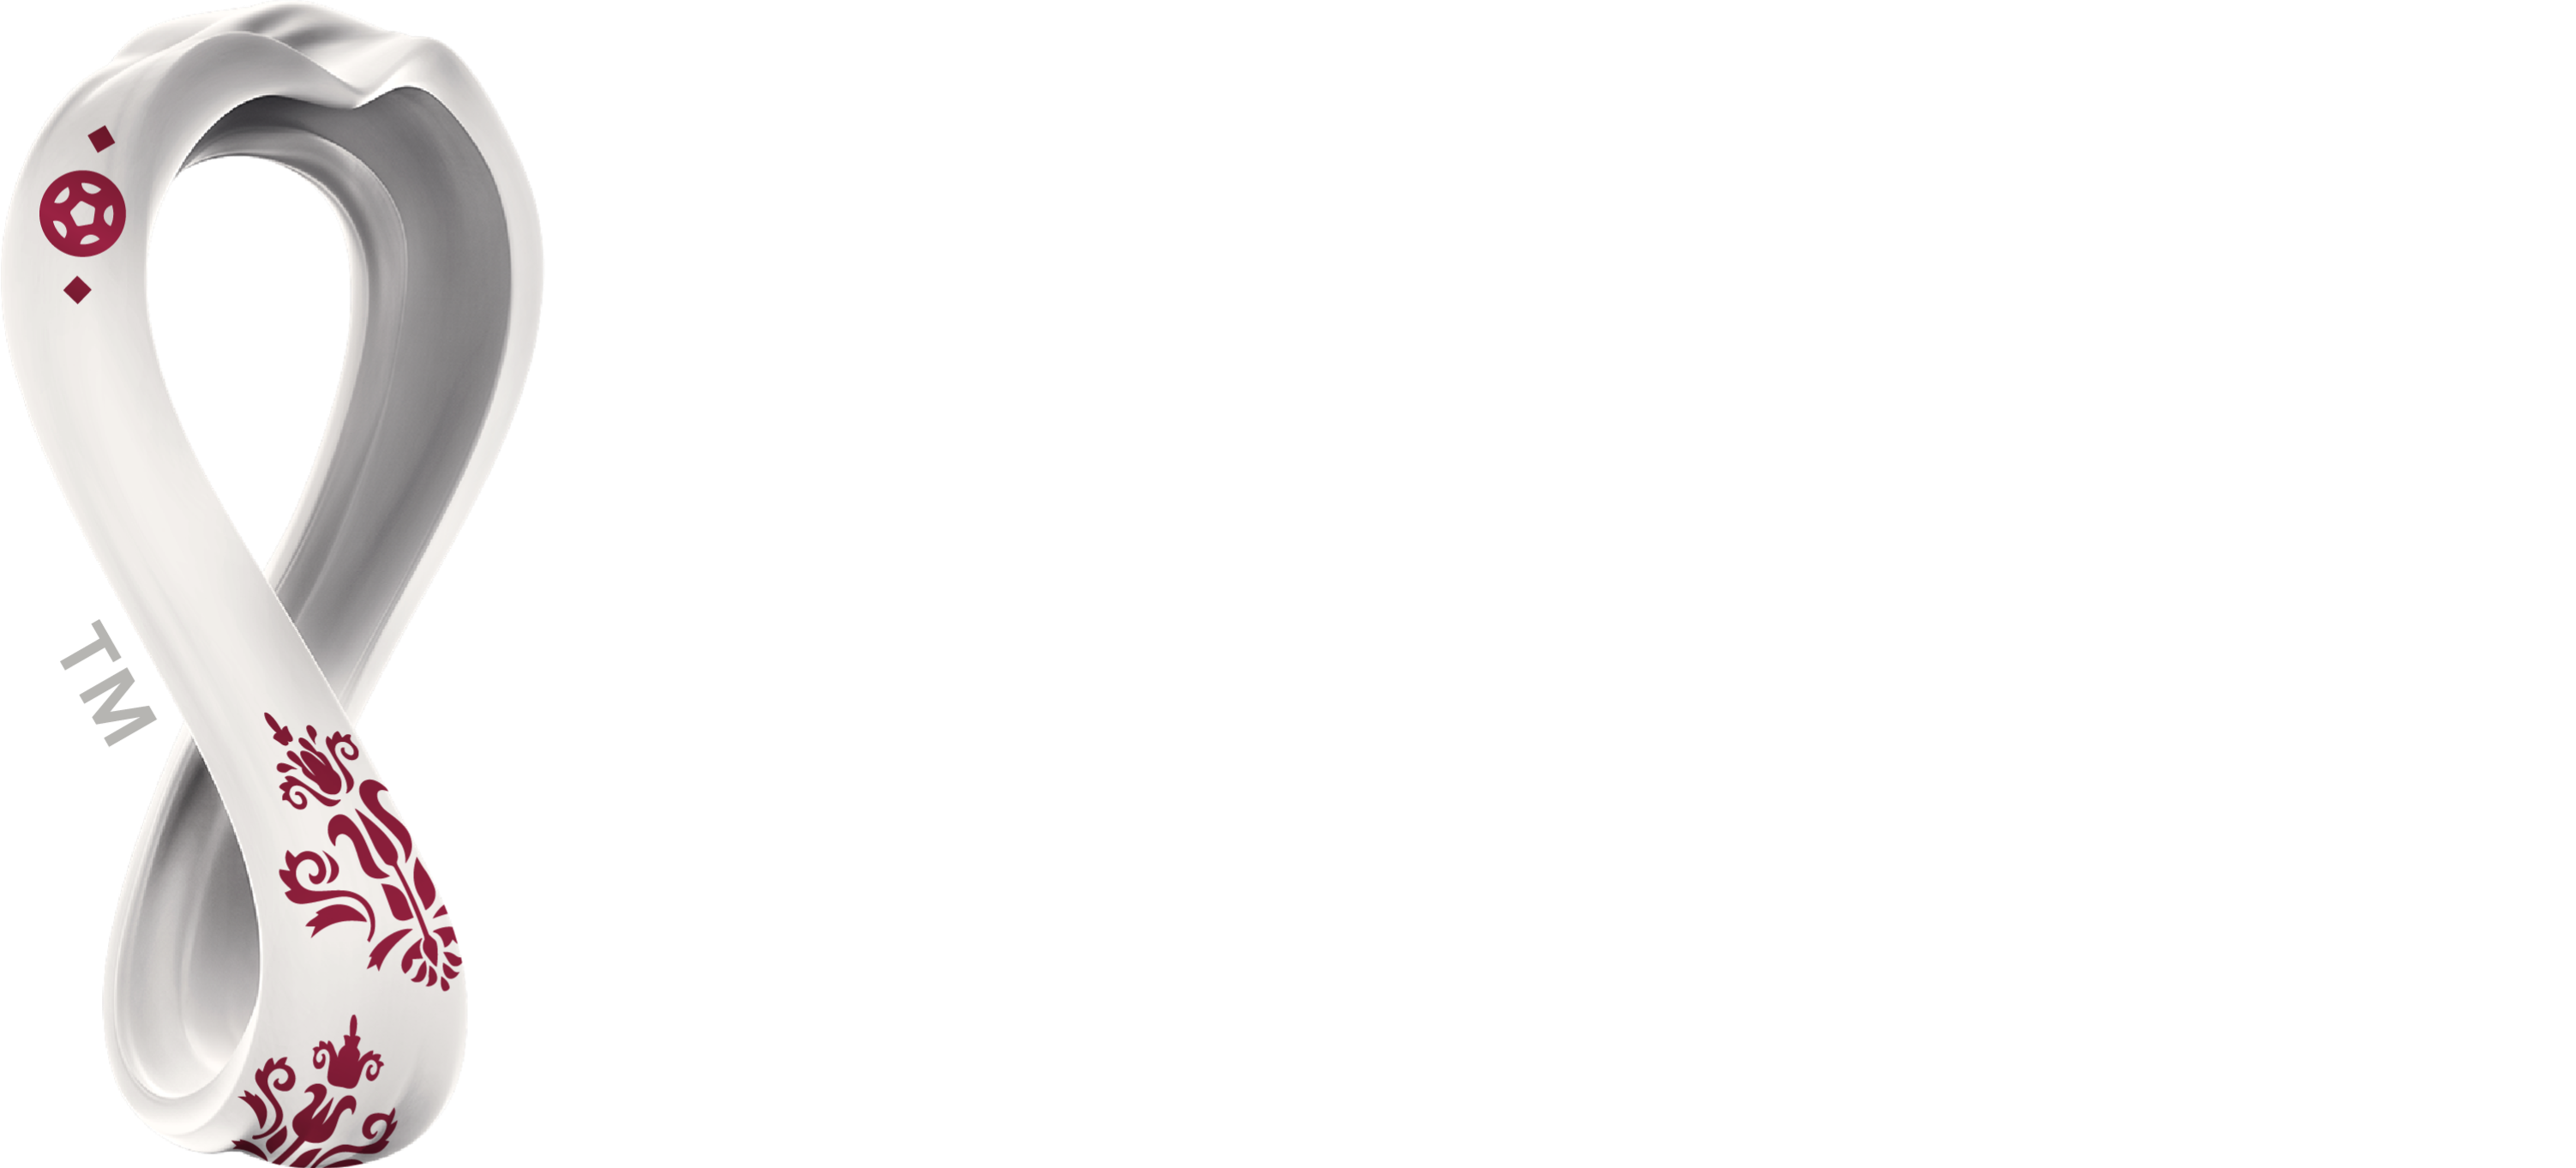 fifa world cup official website